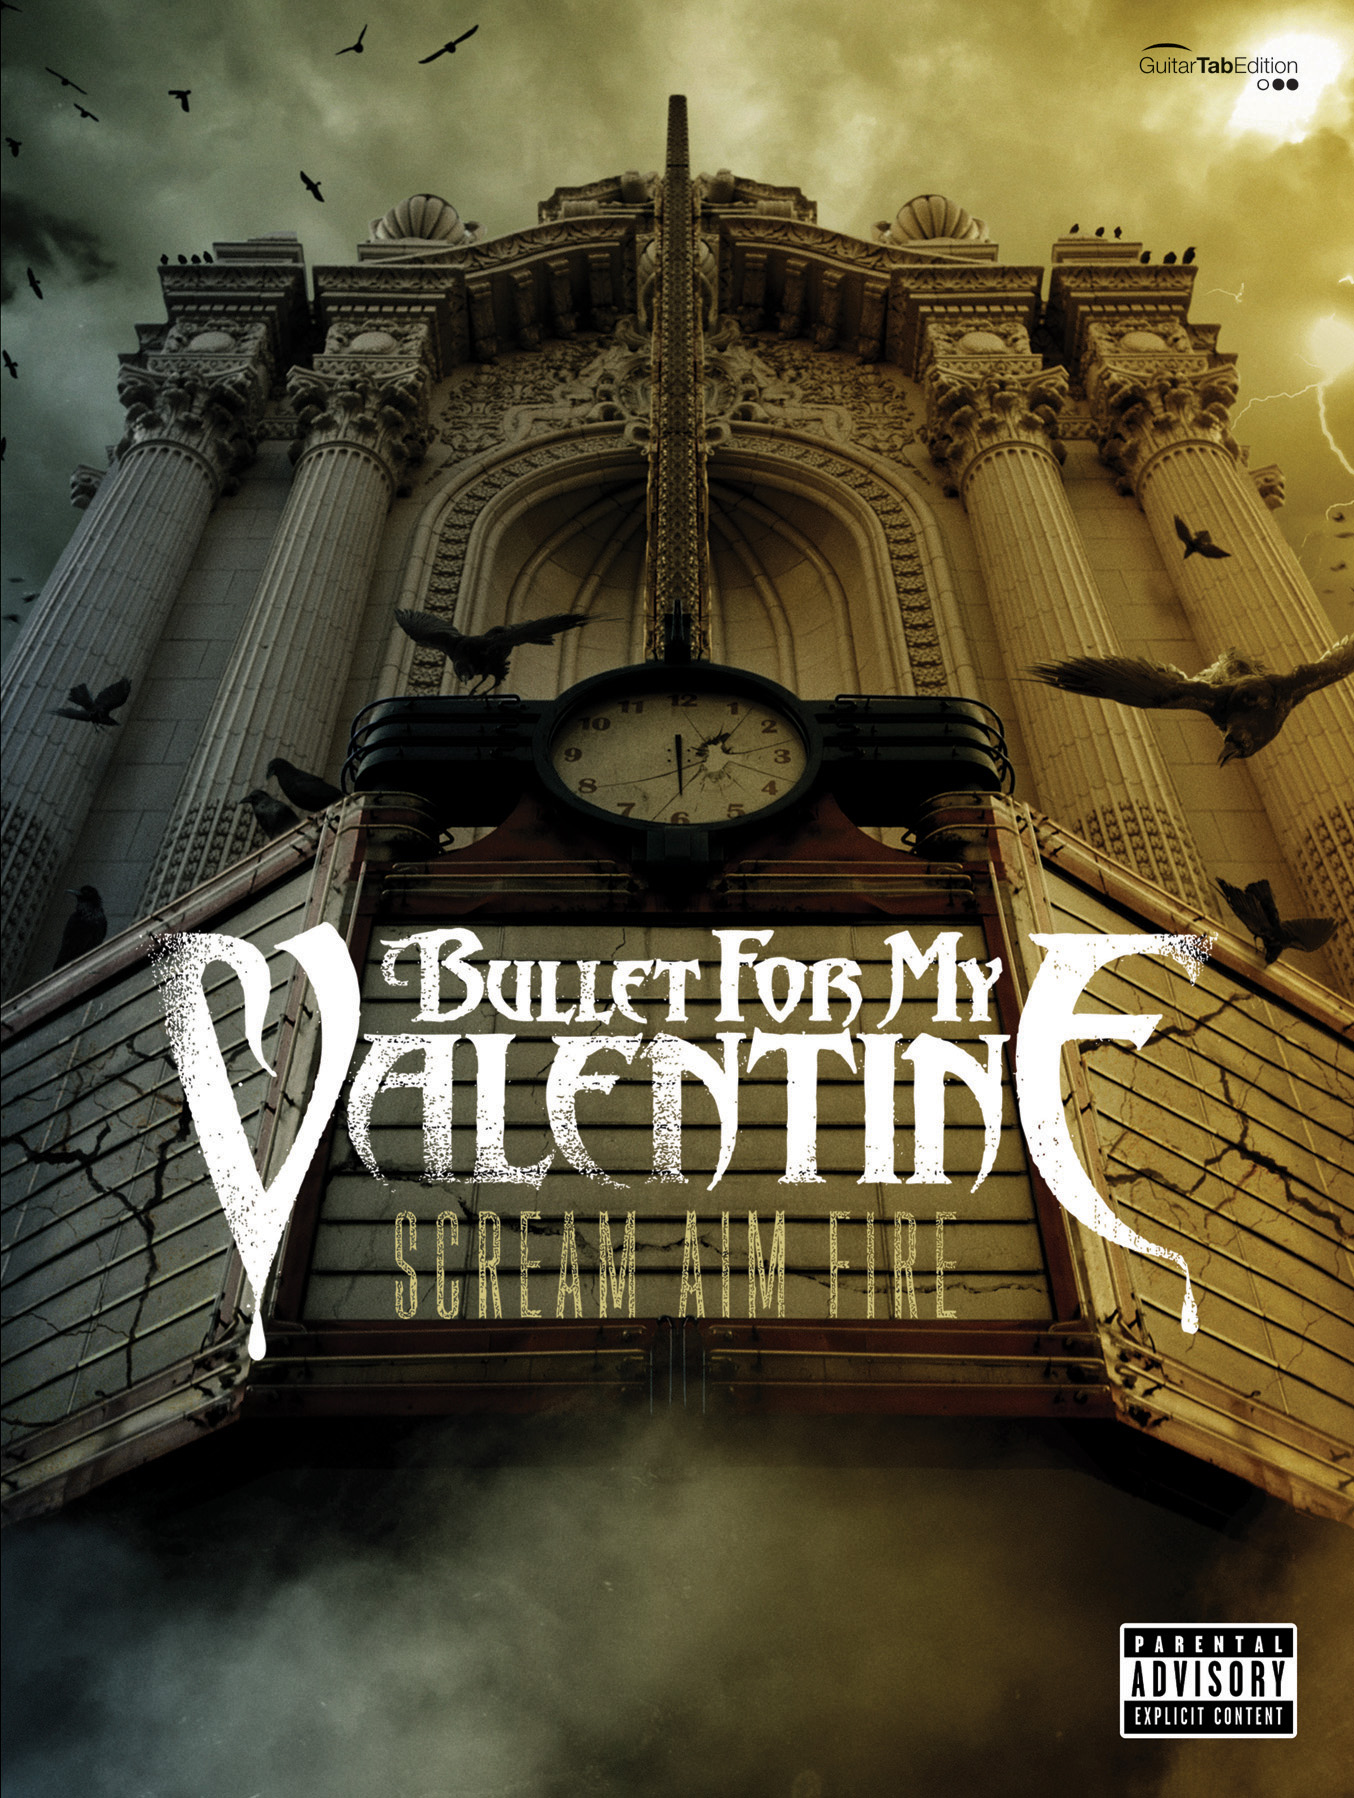 Bullet For My Valentine Scream Aim Fire Tab Sheet Music Songbook